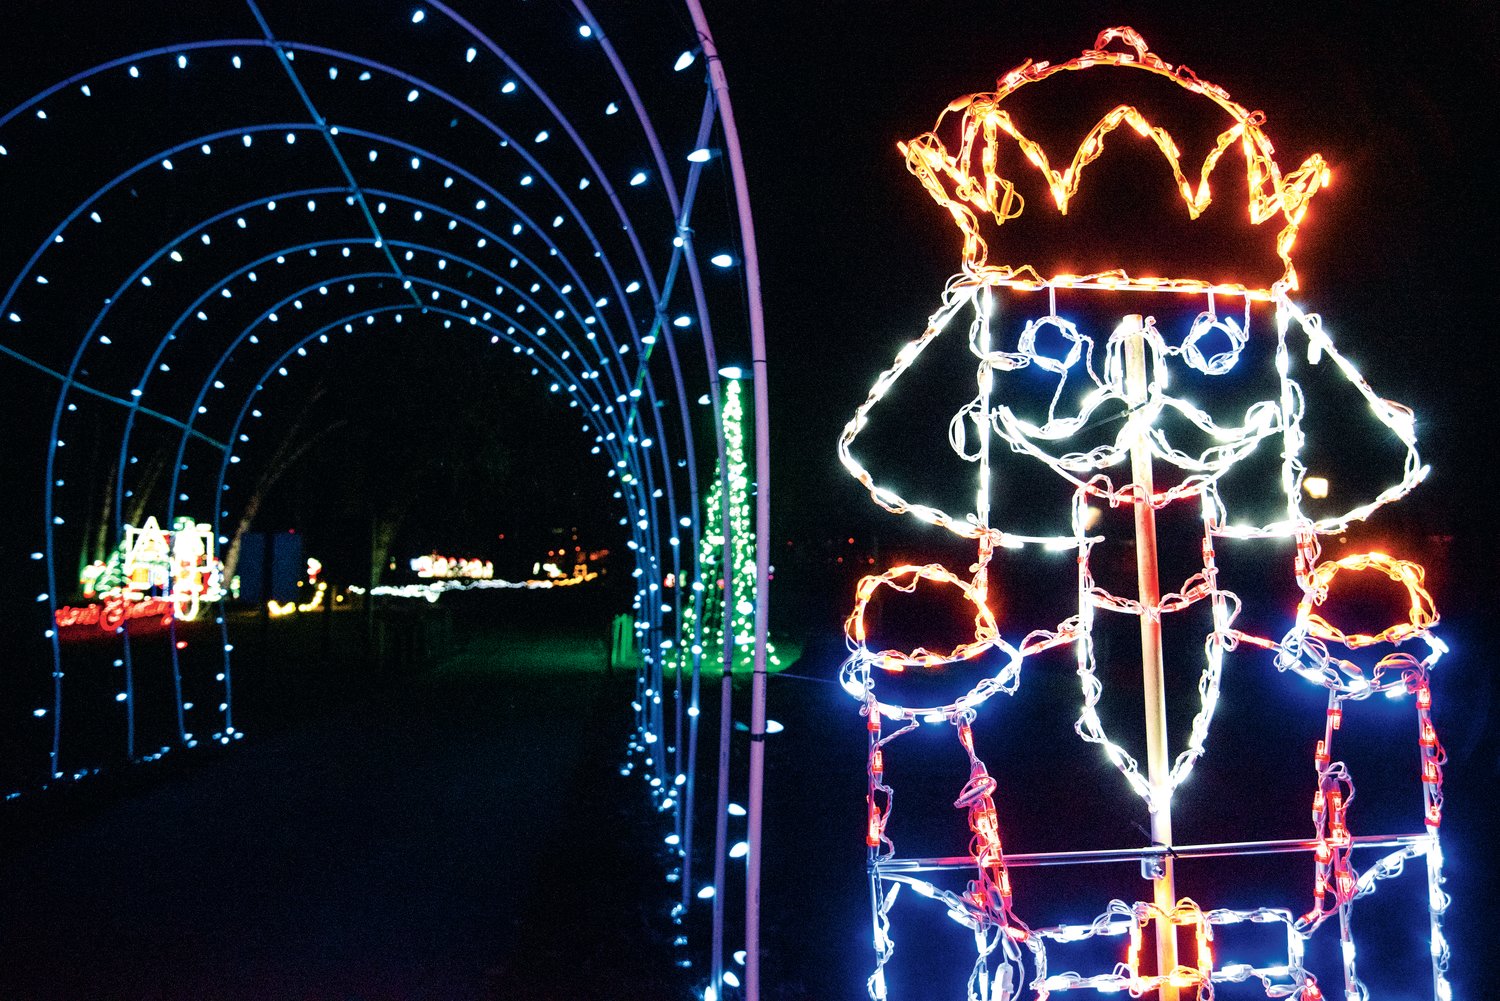 FILE PHOTO — A nutcracker stands guard illuminated by Christmas lights near the entrance of a lighted tunnel at Borst Park in Centralia last December.